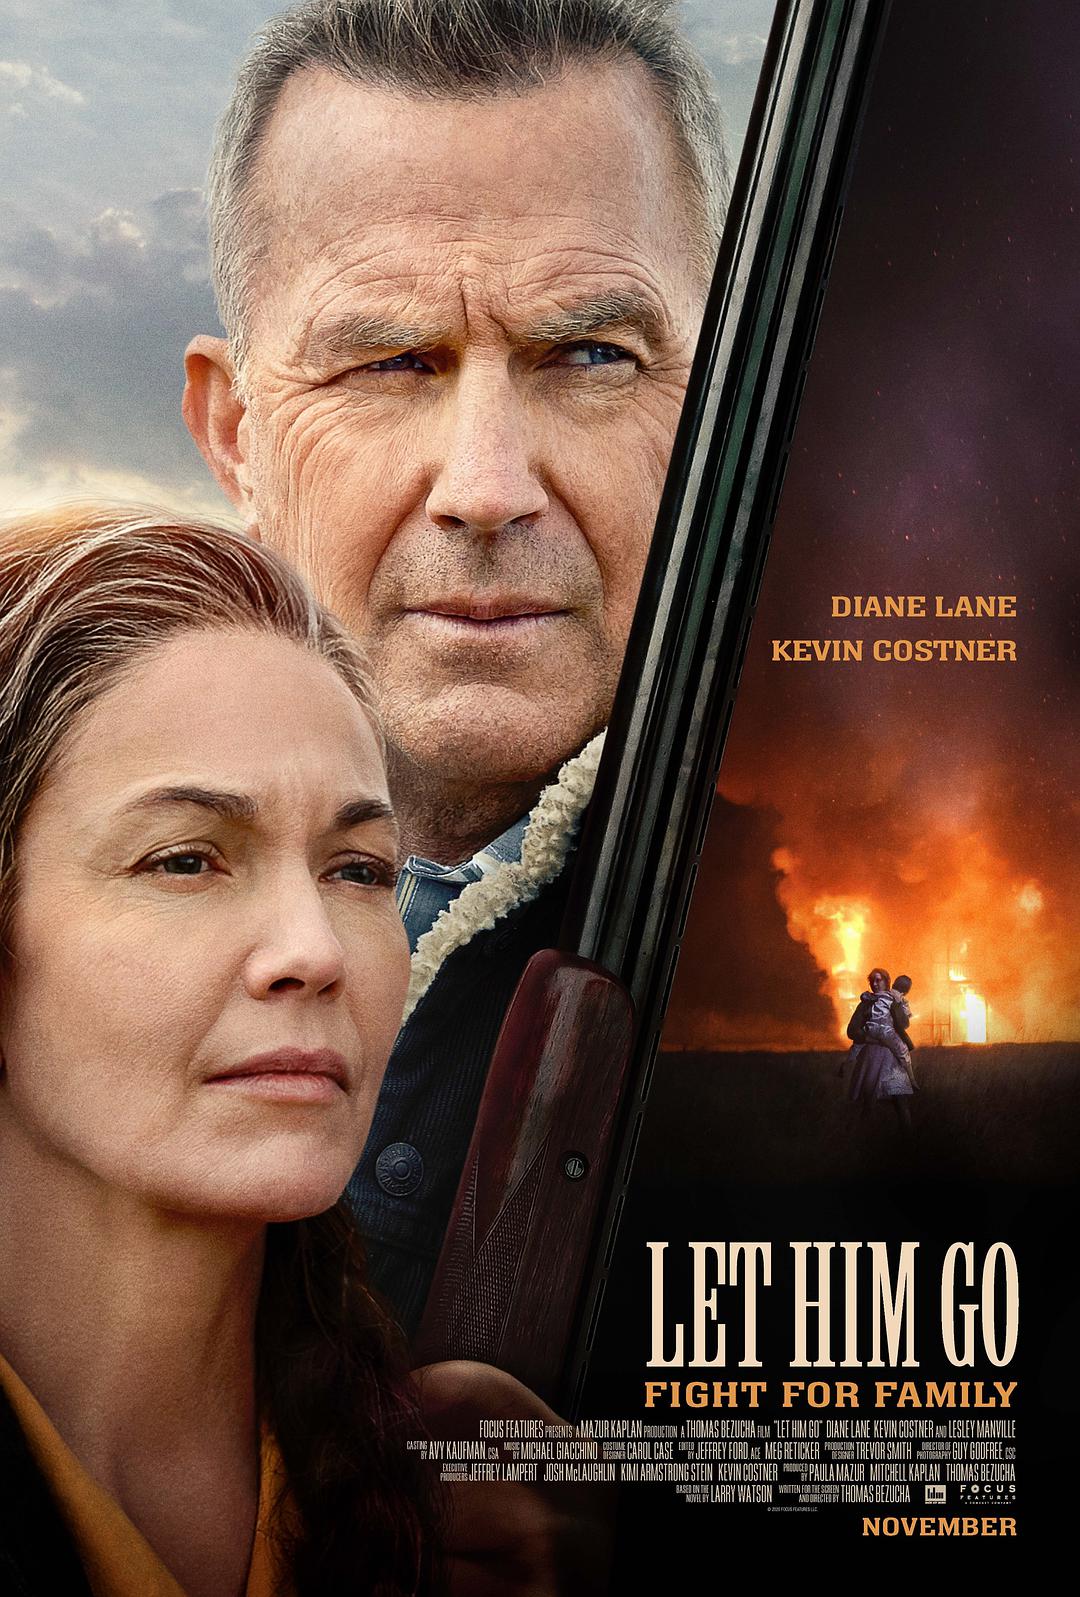  Let.Him.Go.2020.1080p.BluRay.AVC.DTS-HD.MA.7.1-FGT 38.03GB